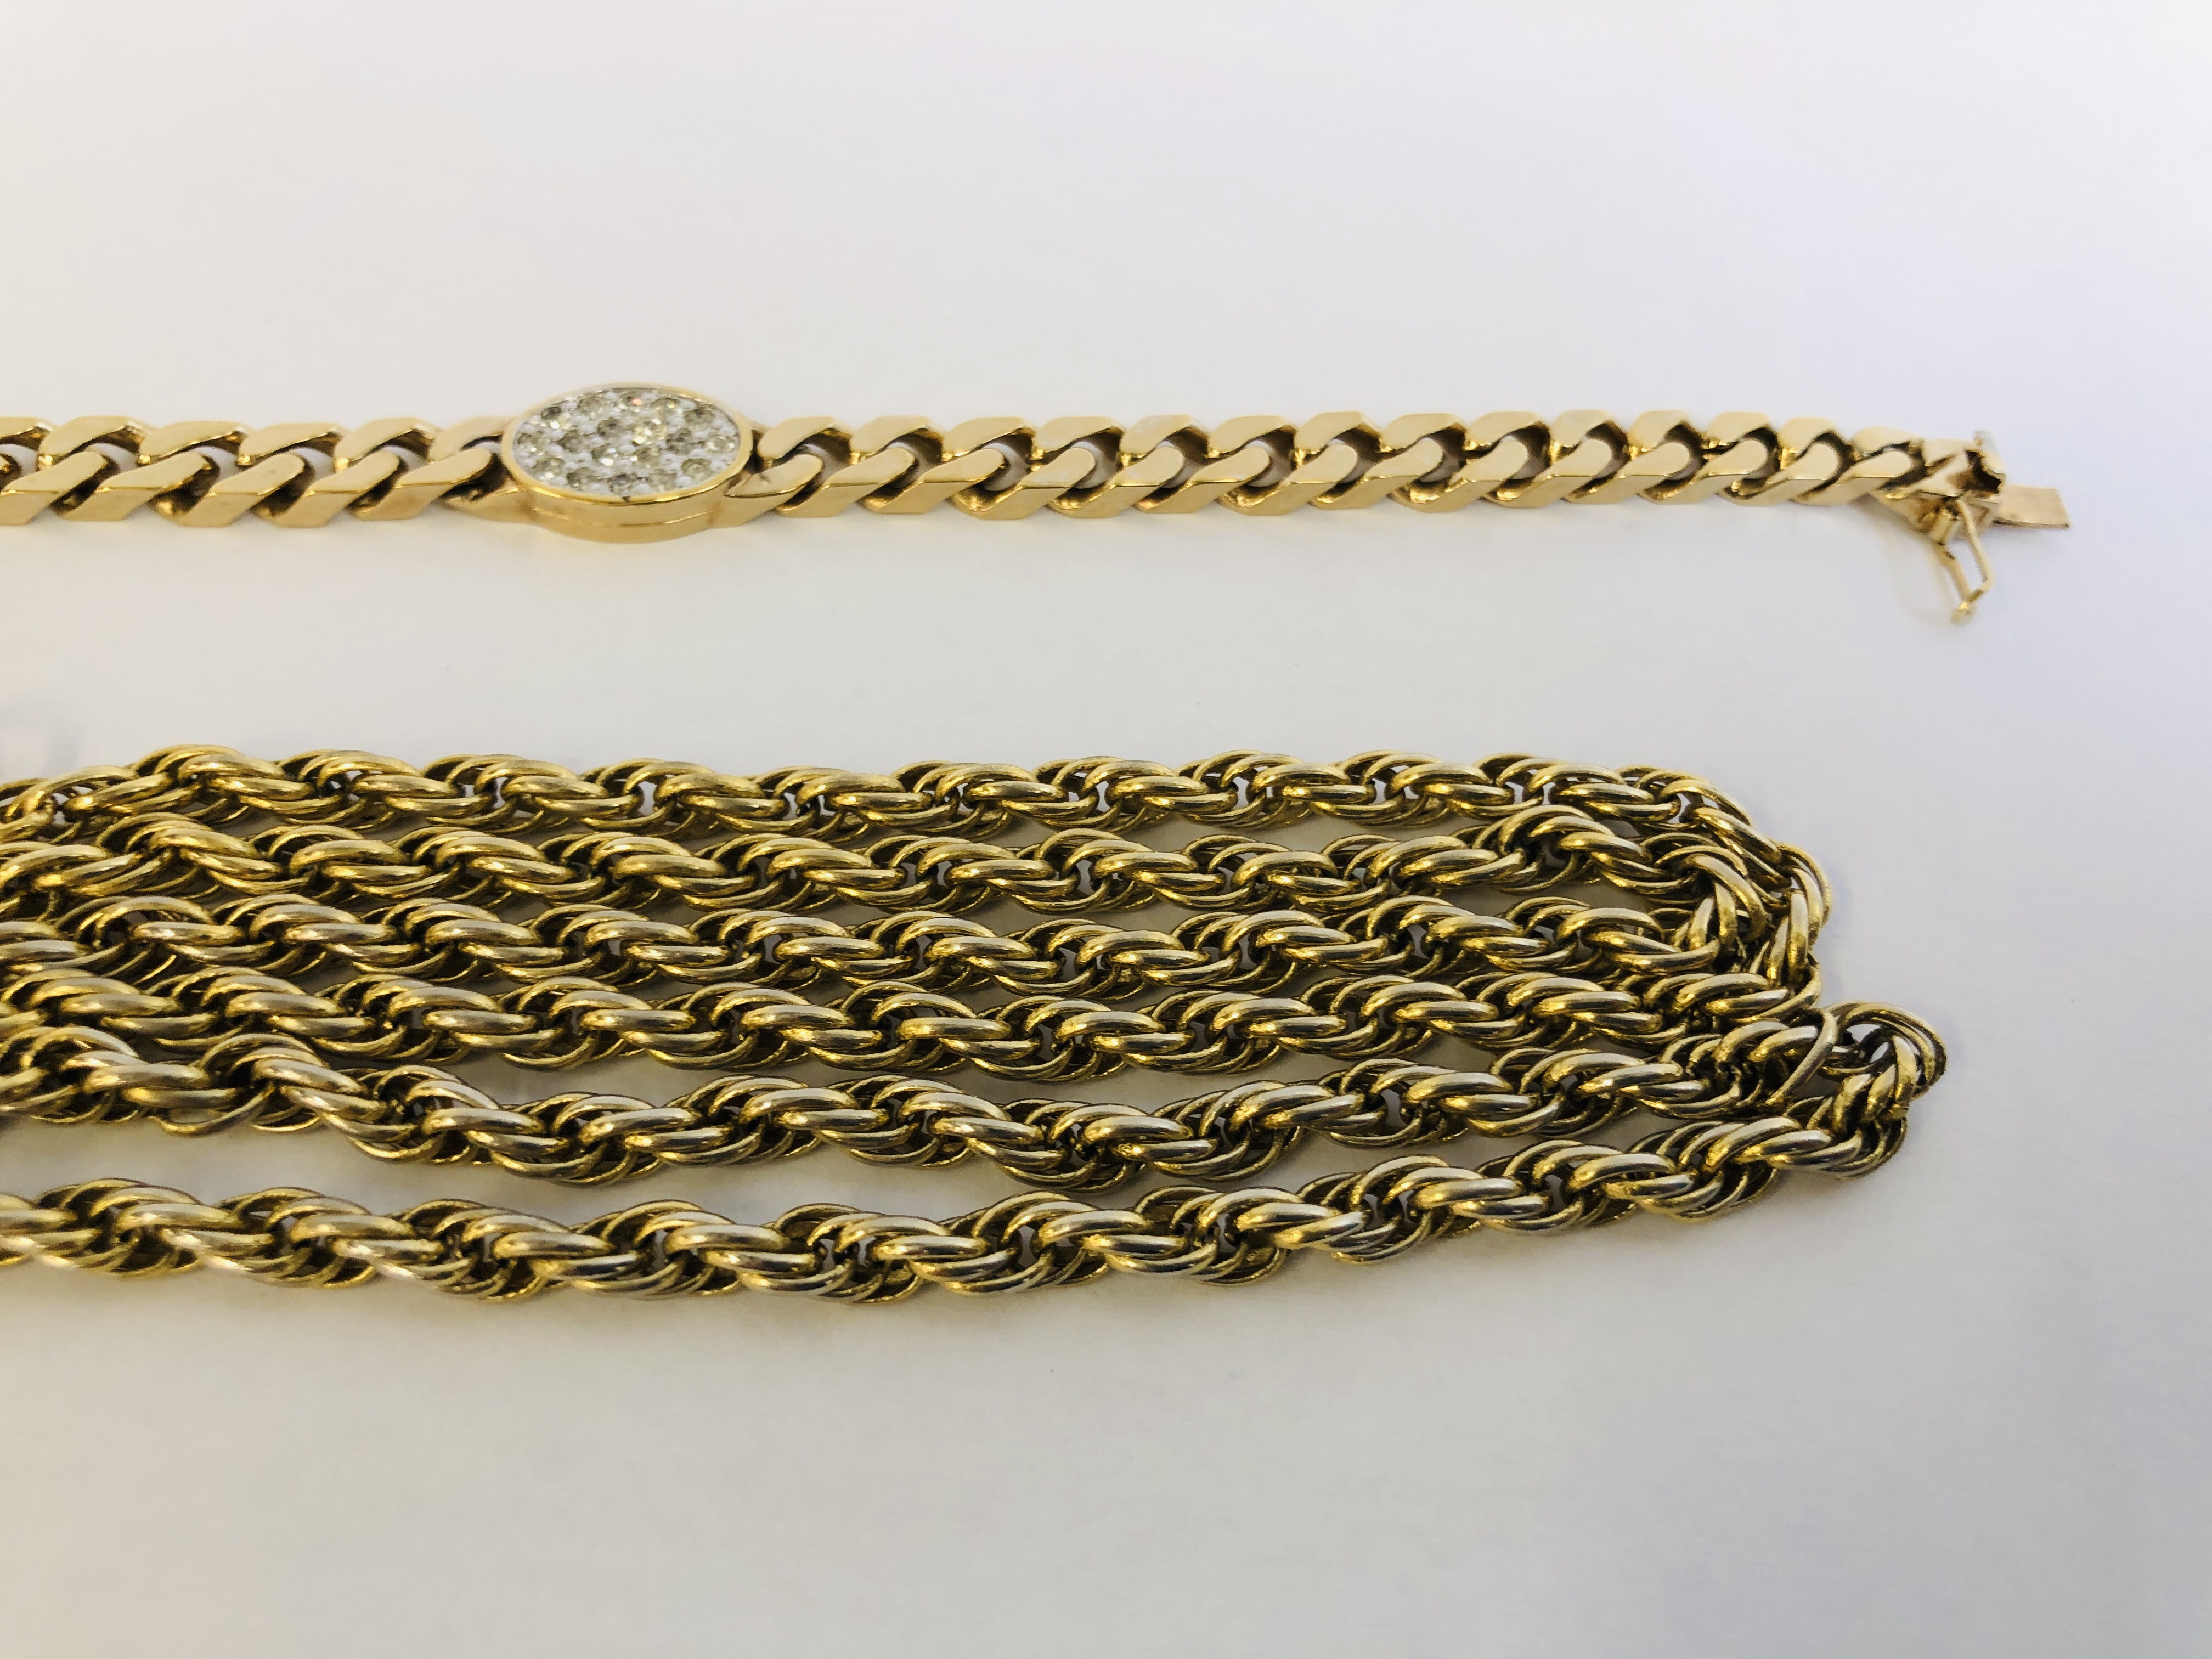 A GOLD TONE COSTUME BRACELET MARKED "PANETTA" ALONG WITH AN UNMARKED ROPE TWIST NECKLACE. - Image 3 of 13